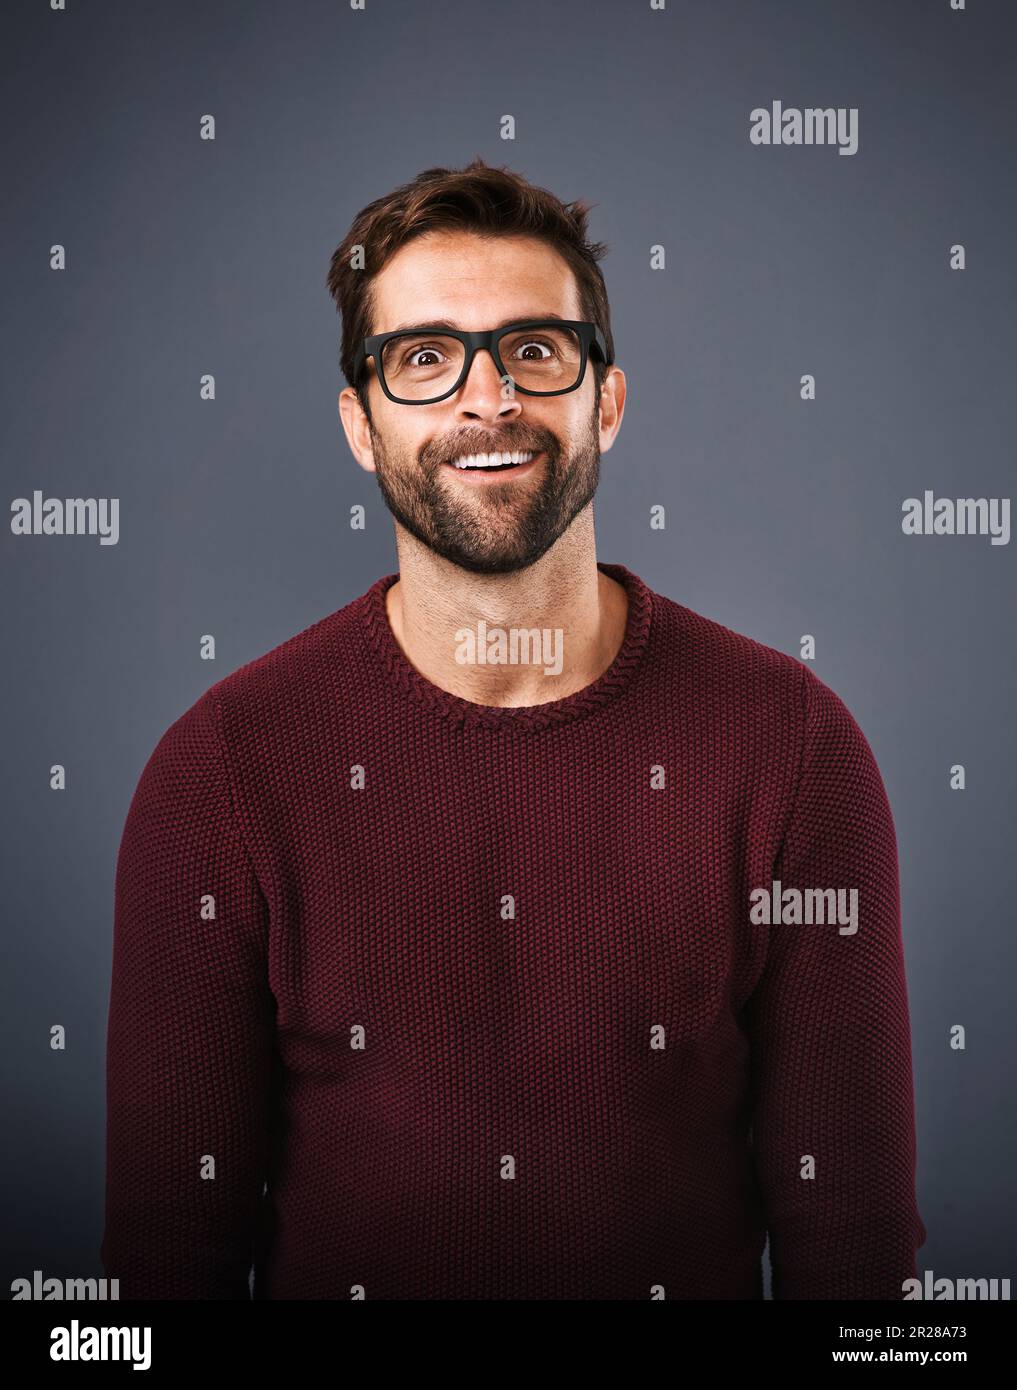 Making a face. Studio shot of a handsome young man pulling funny faces against a gray background. Stock Photo